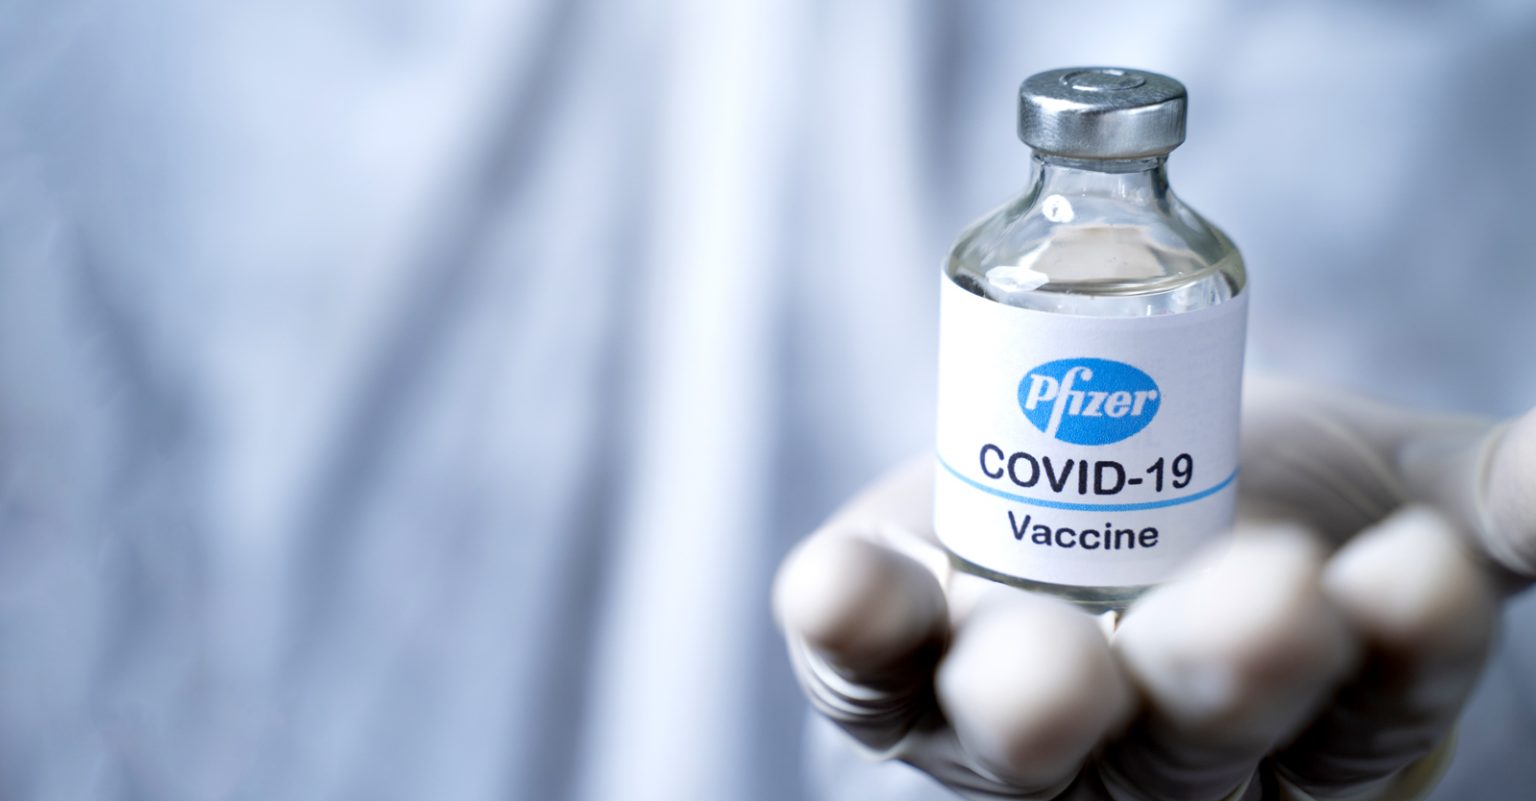 Pfizer Vaccine may put people at higher risk for Covid variants, Israeli study shows